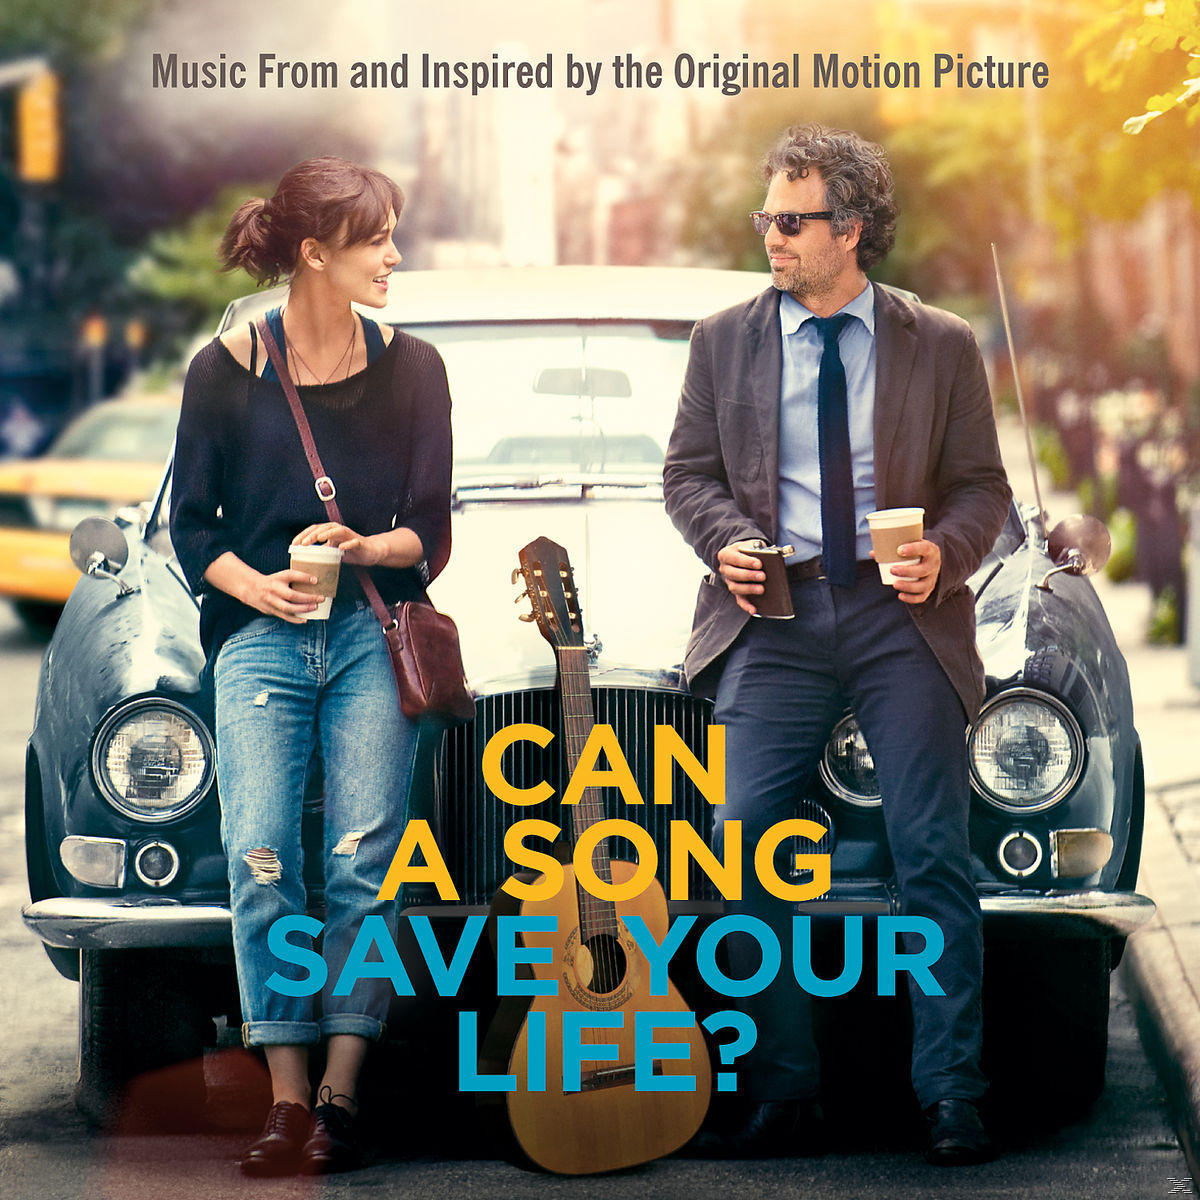 Song VARIOUS Your (CD) Save Life? A - Can -